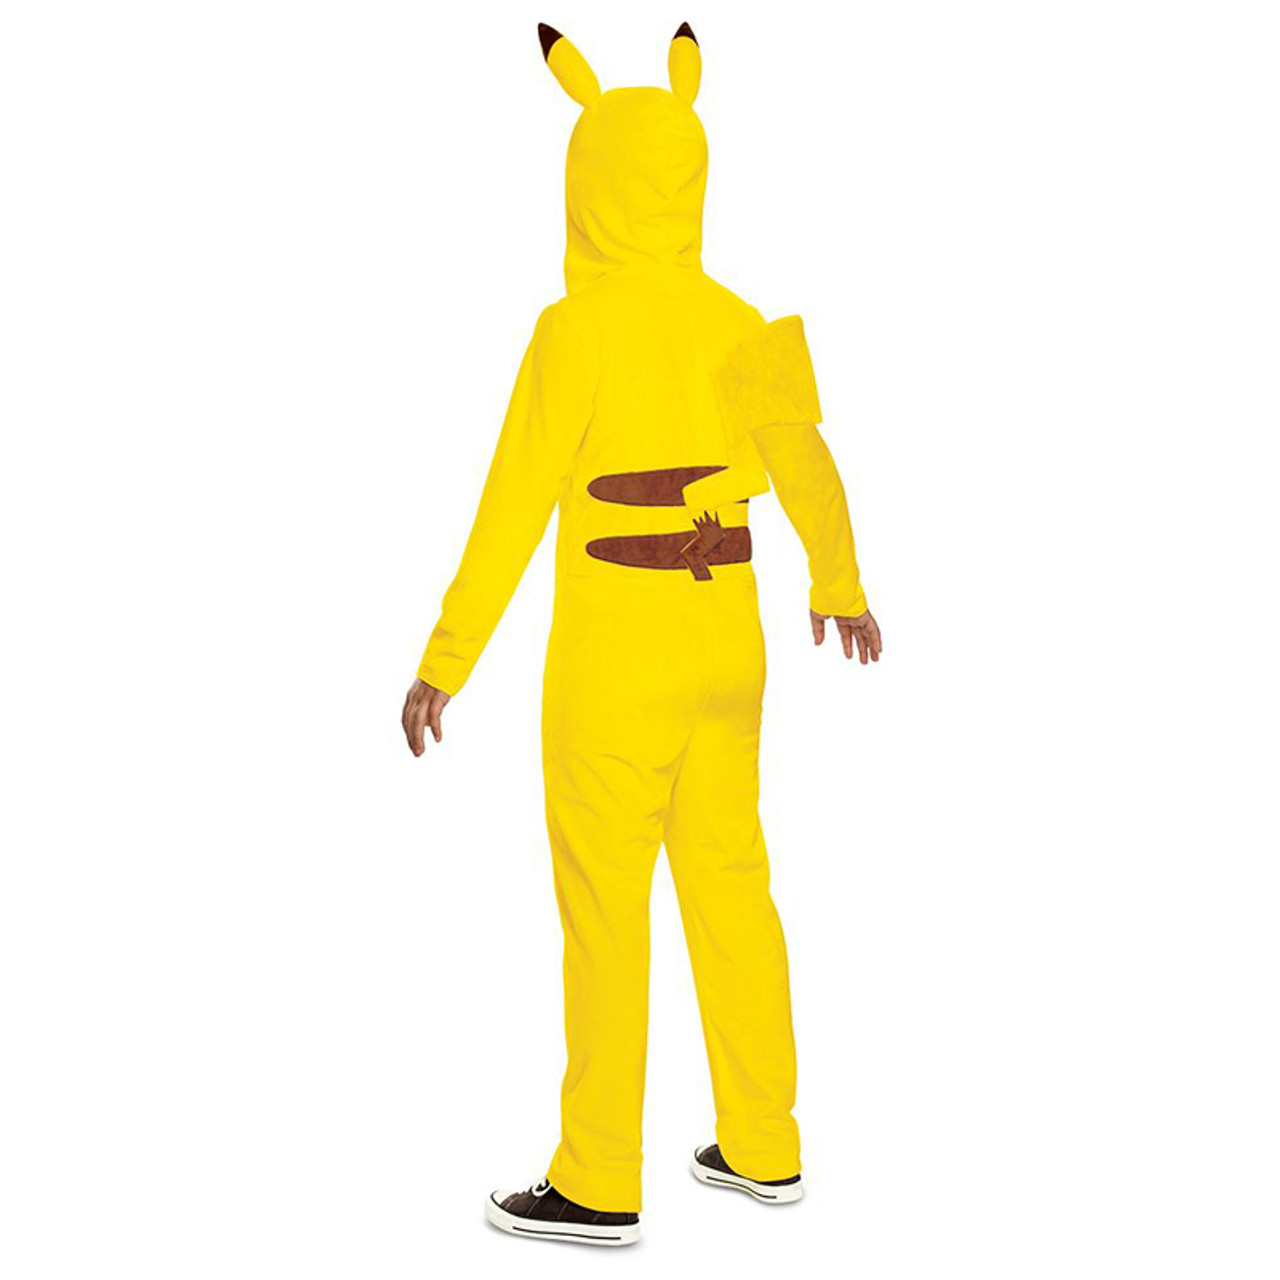 Pikachu Hooded Costume inset